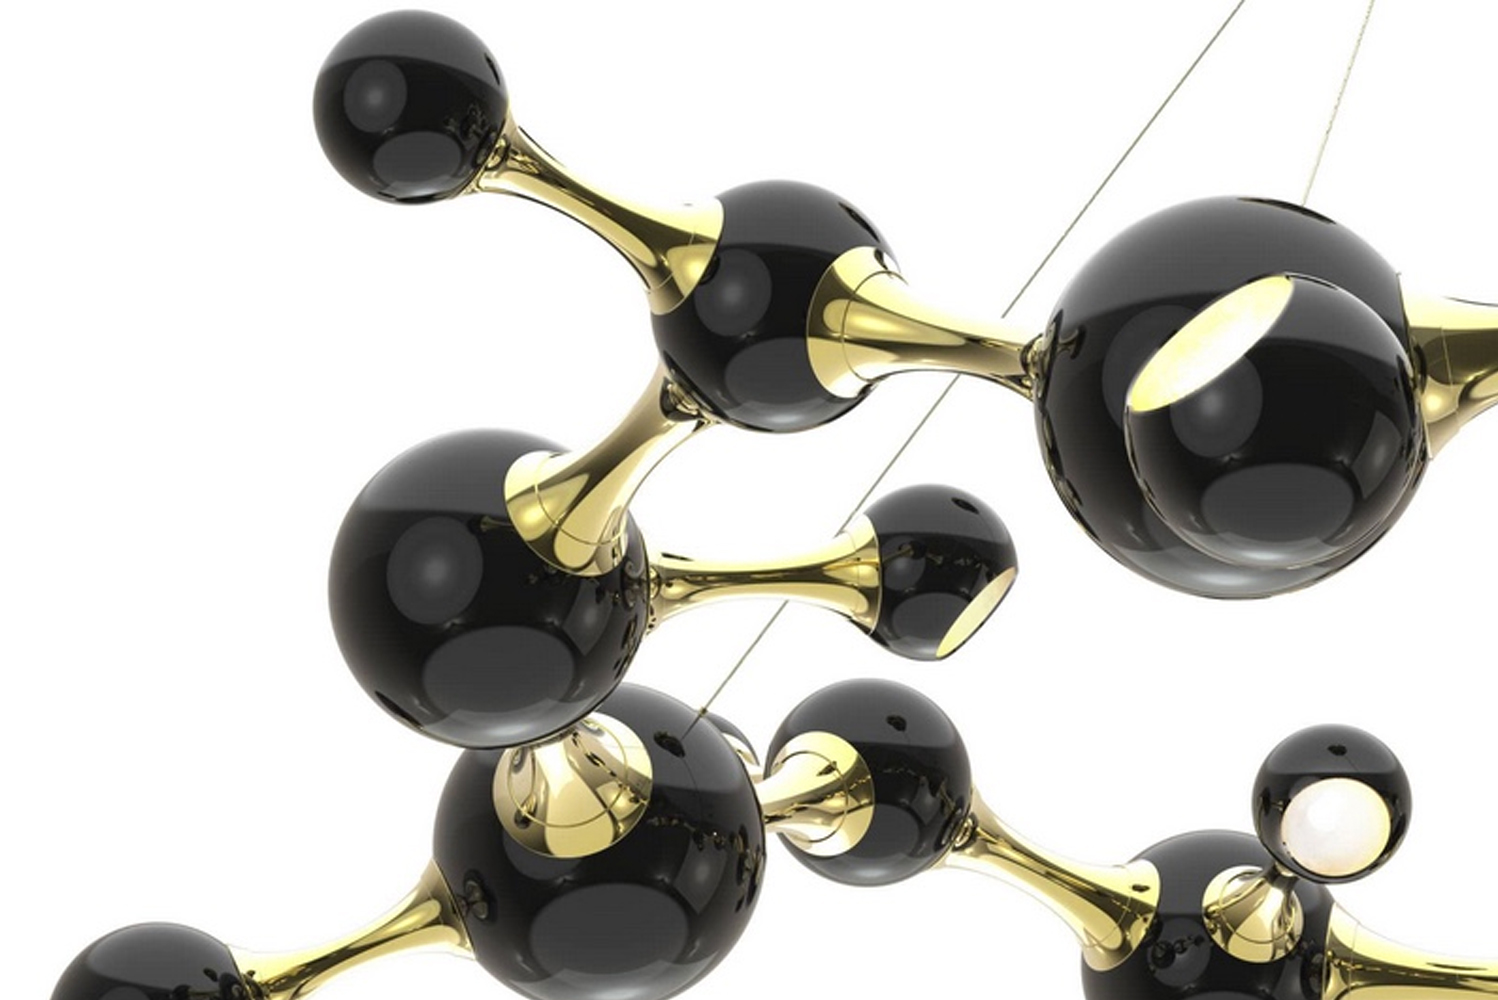 Portuguese lighting brand Delightfull unveiled a new chandelier with a design emphasis on molecules appropriately named Atom